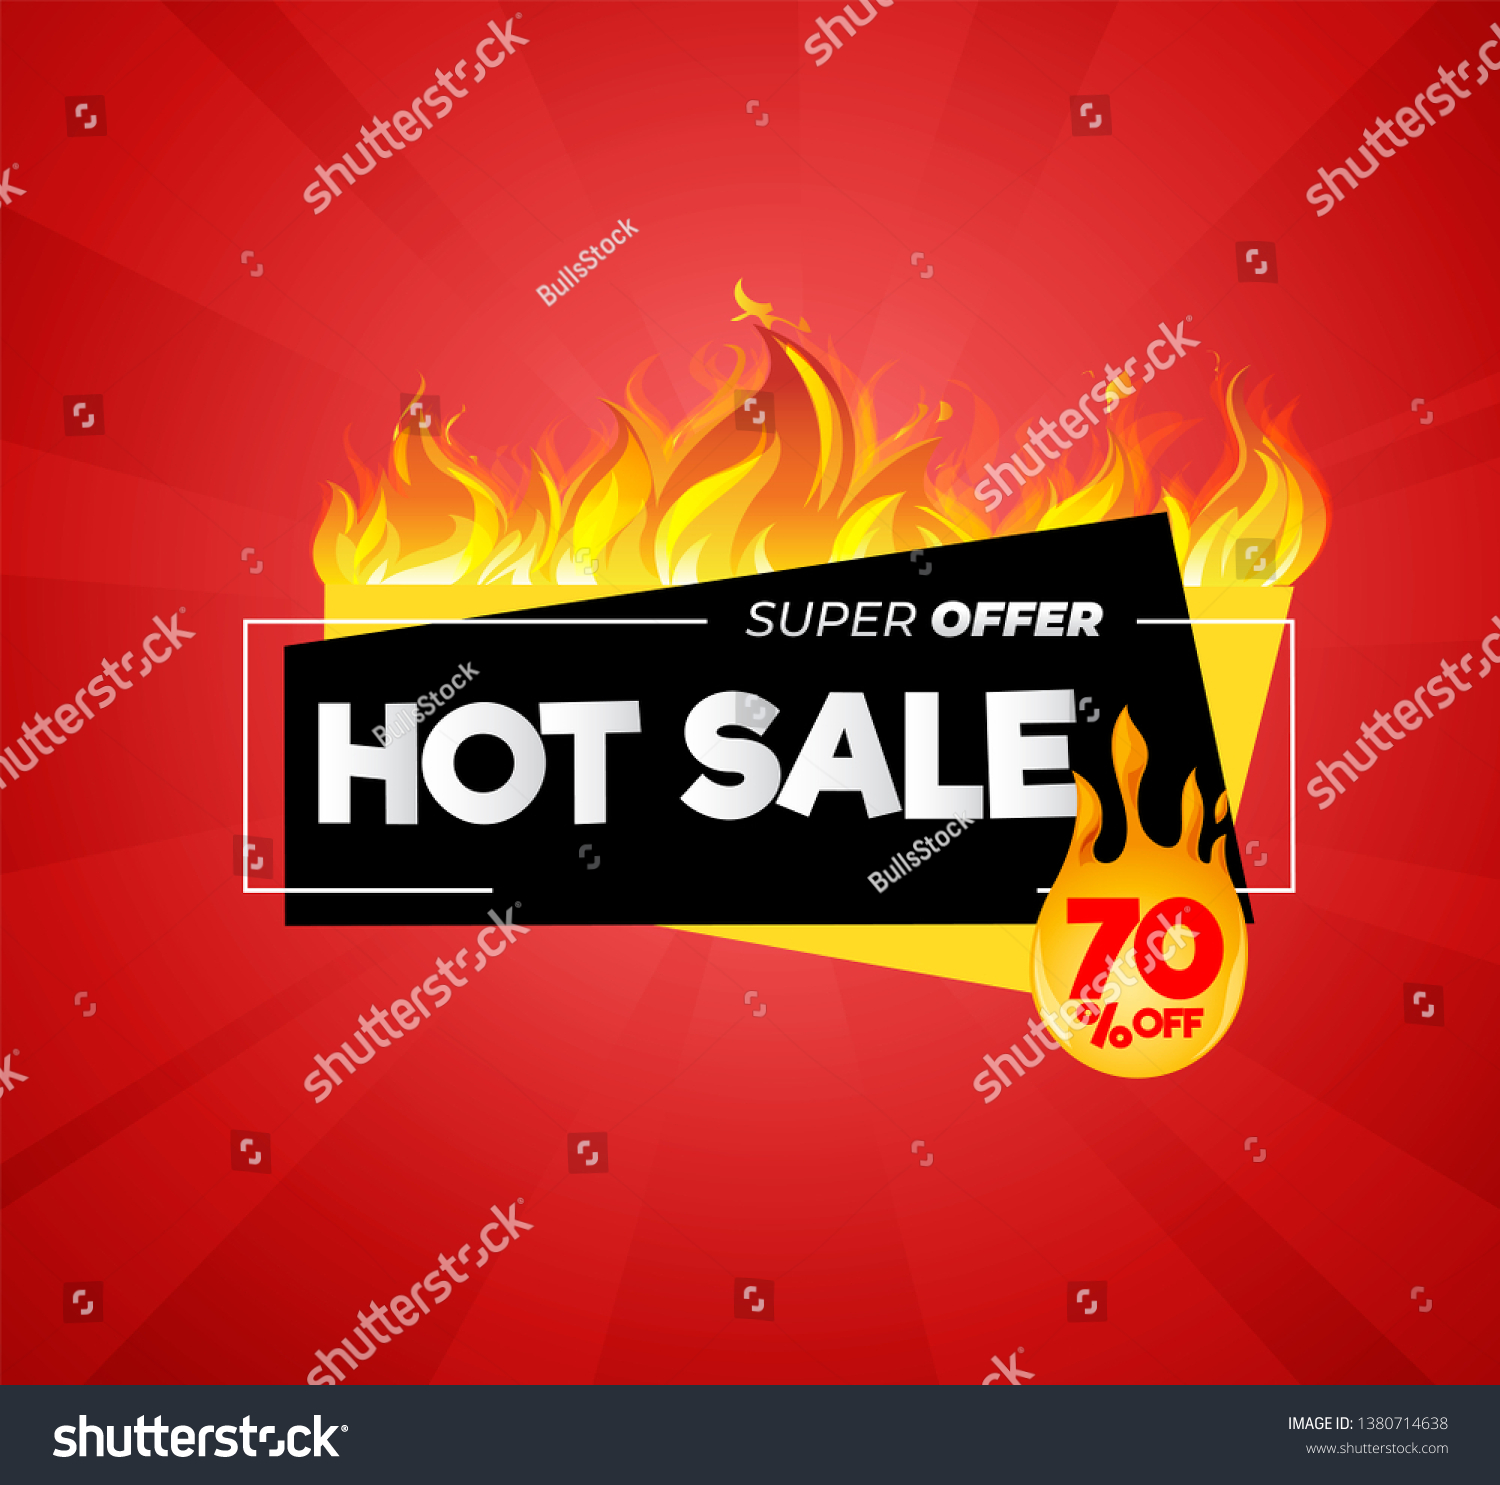 Hot sale price offer deal vector labels templates #1380714638